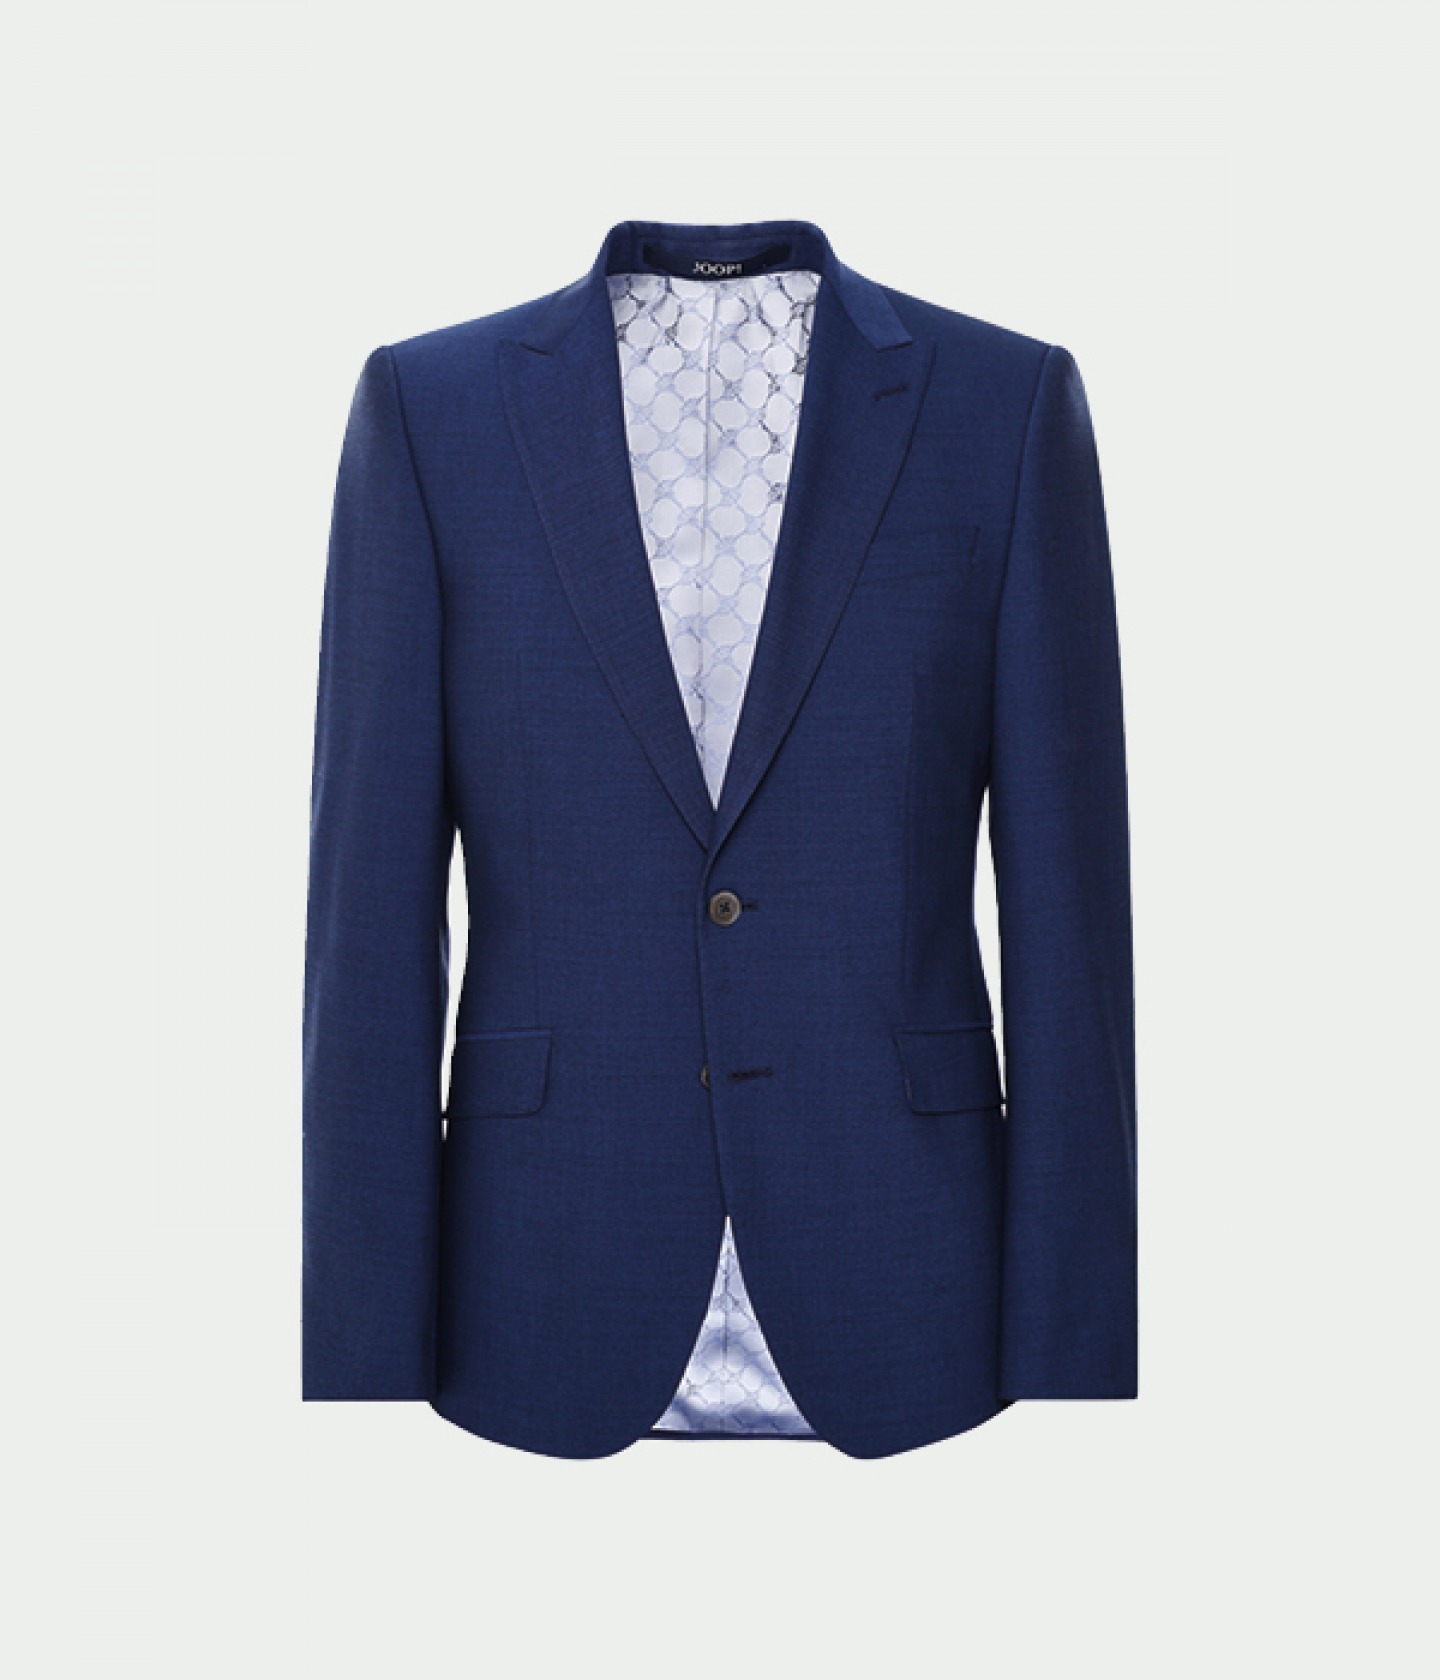 6 Stylish Work Wear Pieces for Men and Weekend Alternatives from John  Lewis, End and more